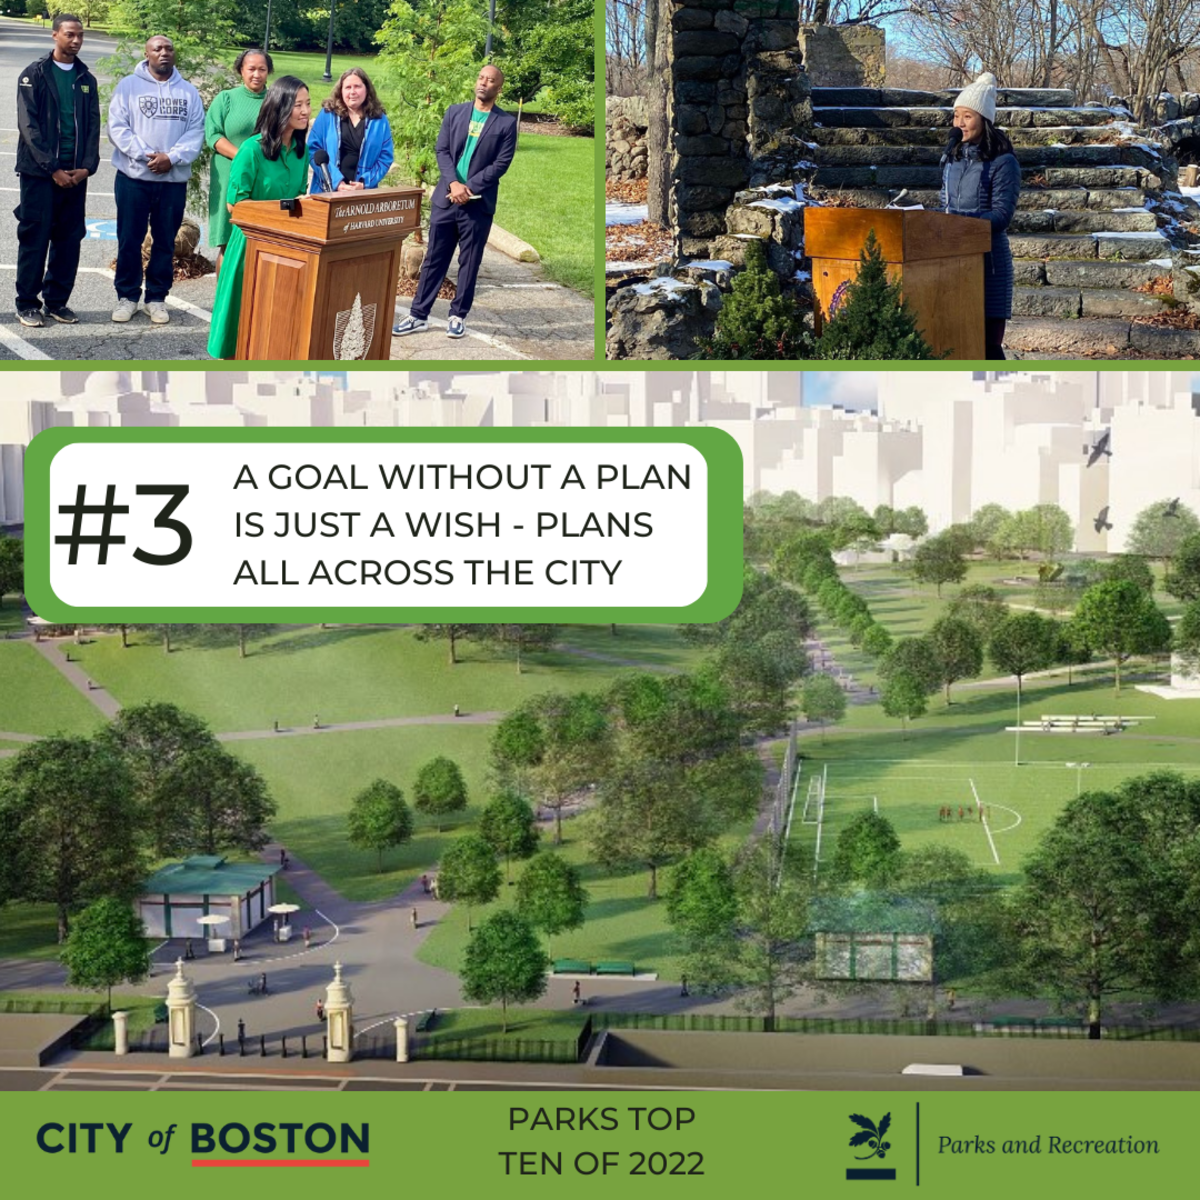 Parks top ten of 2022 #3 A goal without a plan is just a wish - plans all across the city. Grid - Mayor Michelle Wu  at 2 announcements and an artist rendering of a redesigned park.